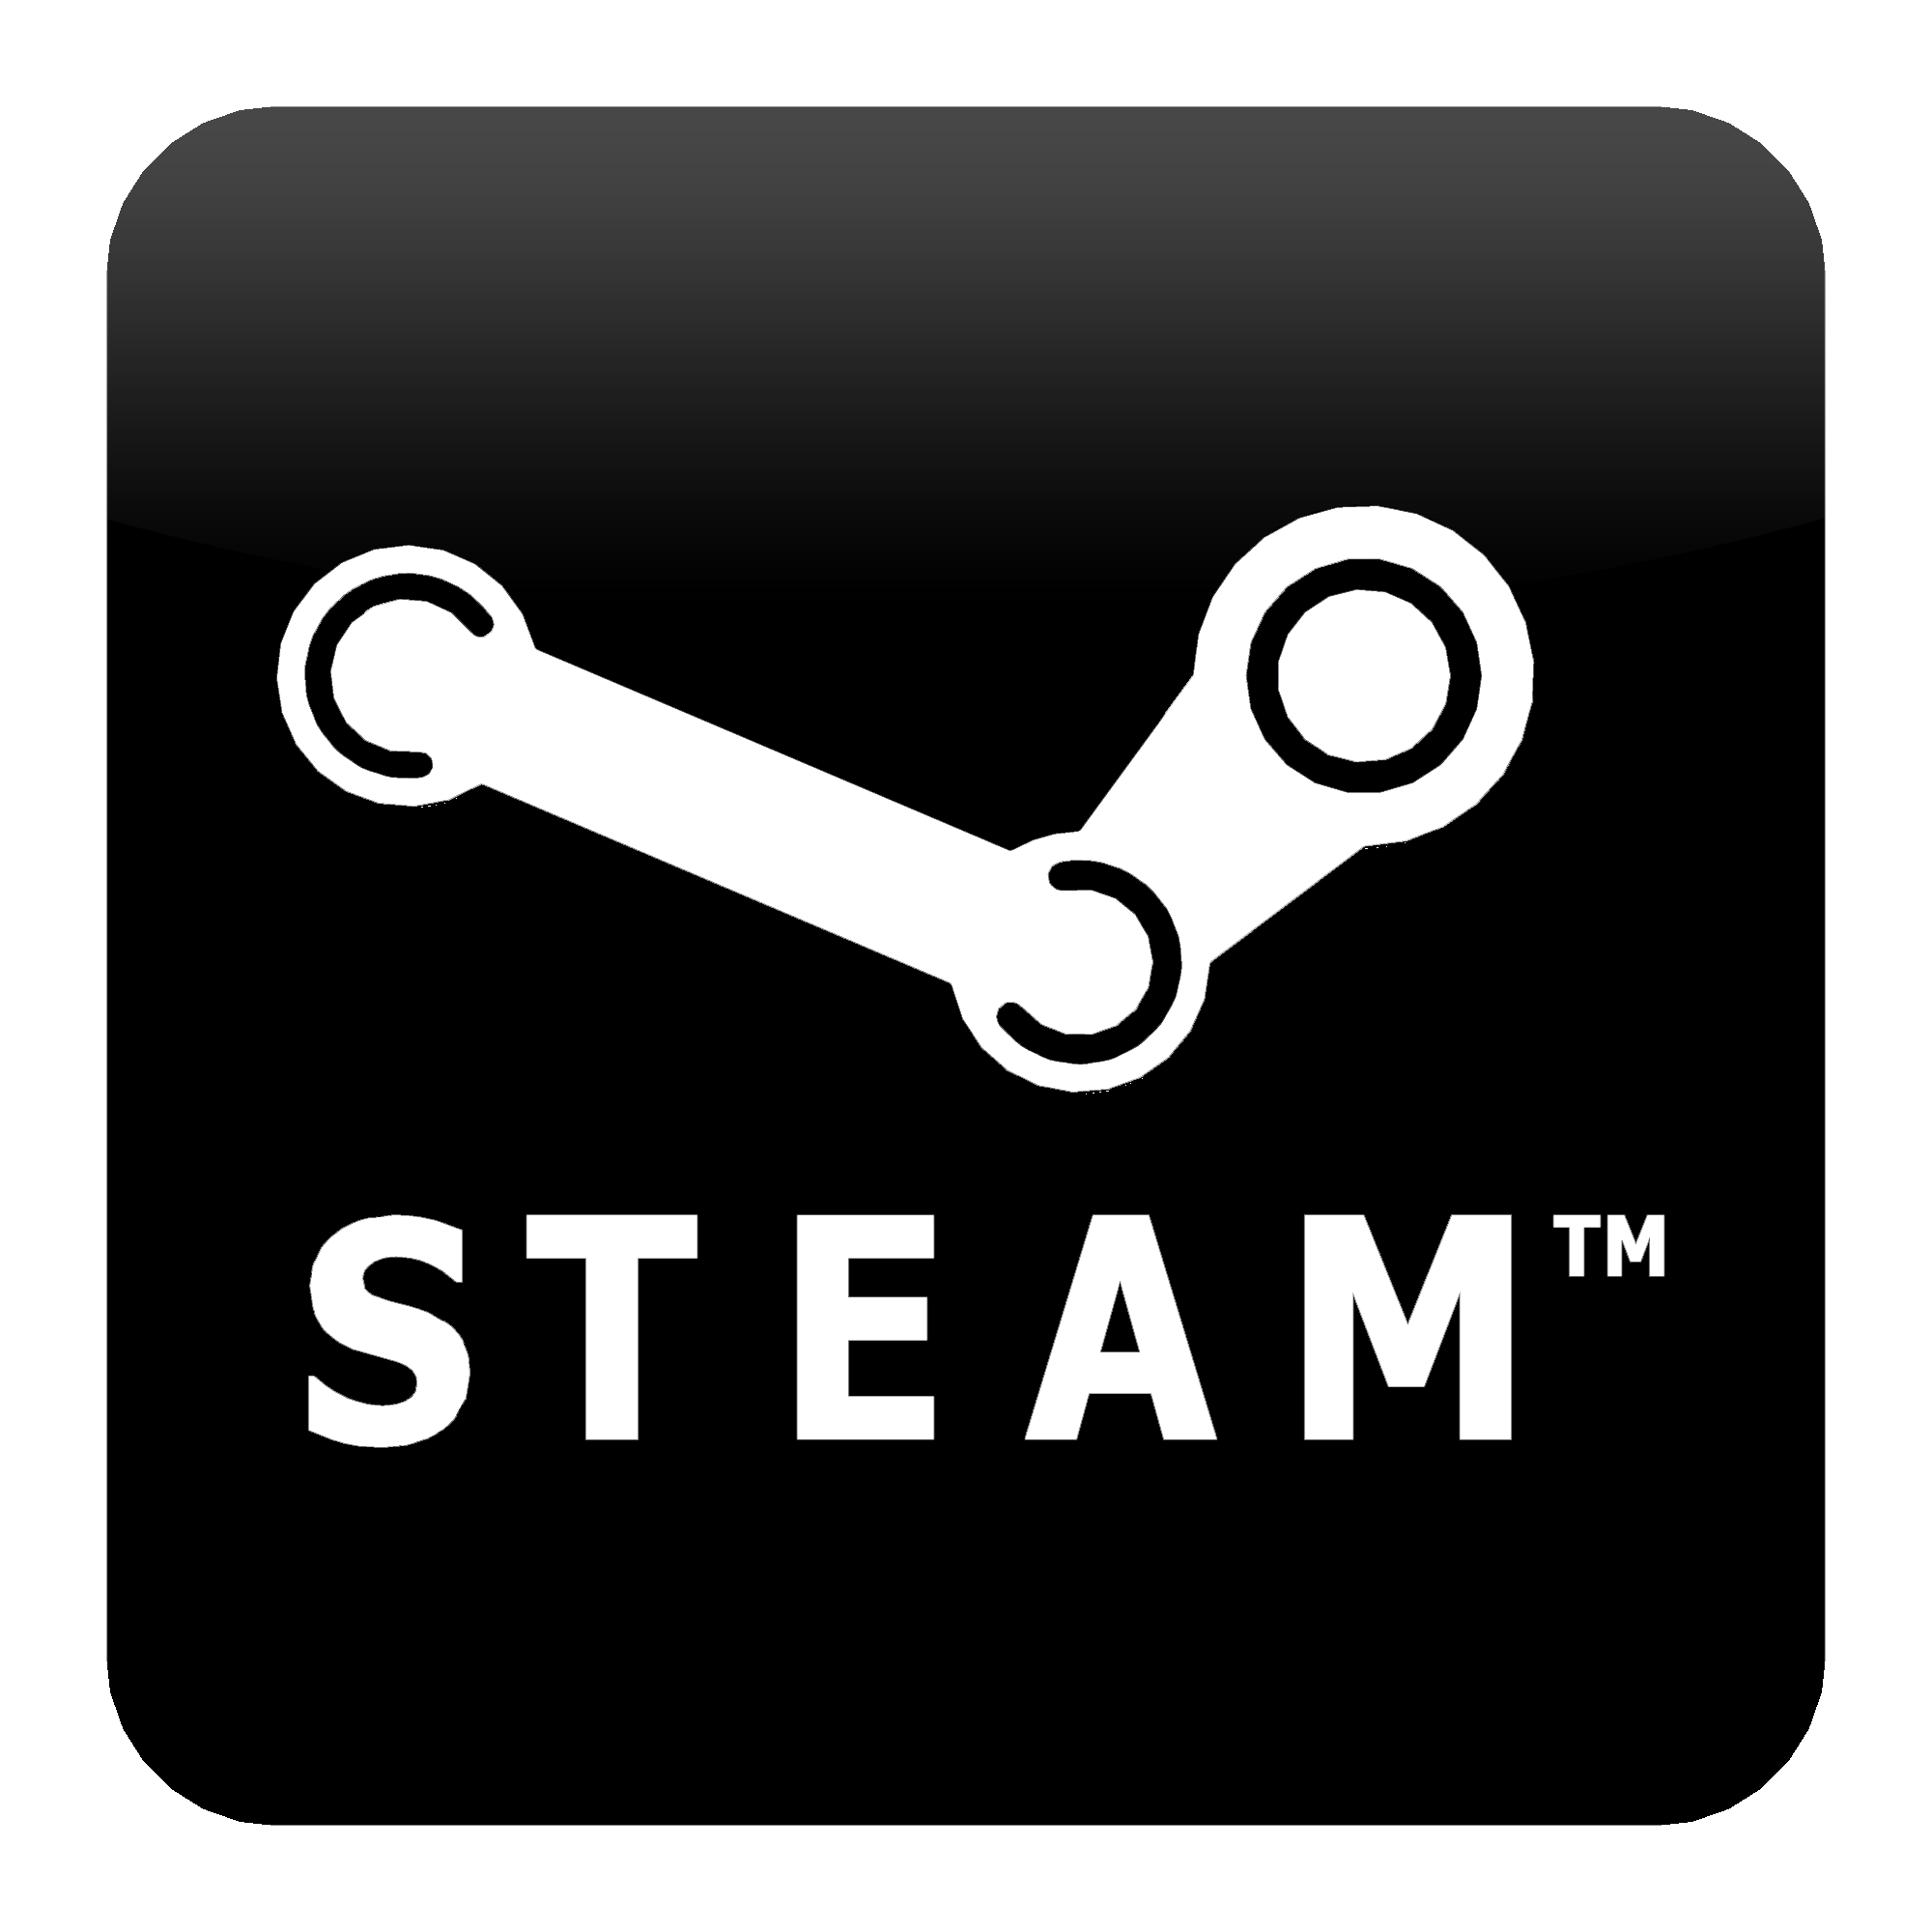 Аккаунт Steam( CSS + 1.6 + LeftT 4 Dead and others)